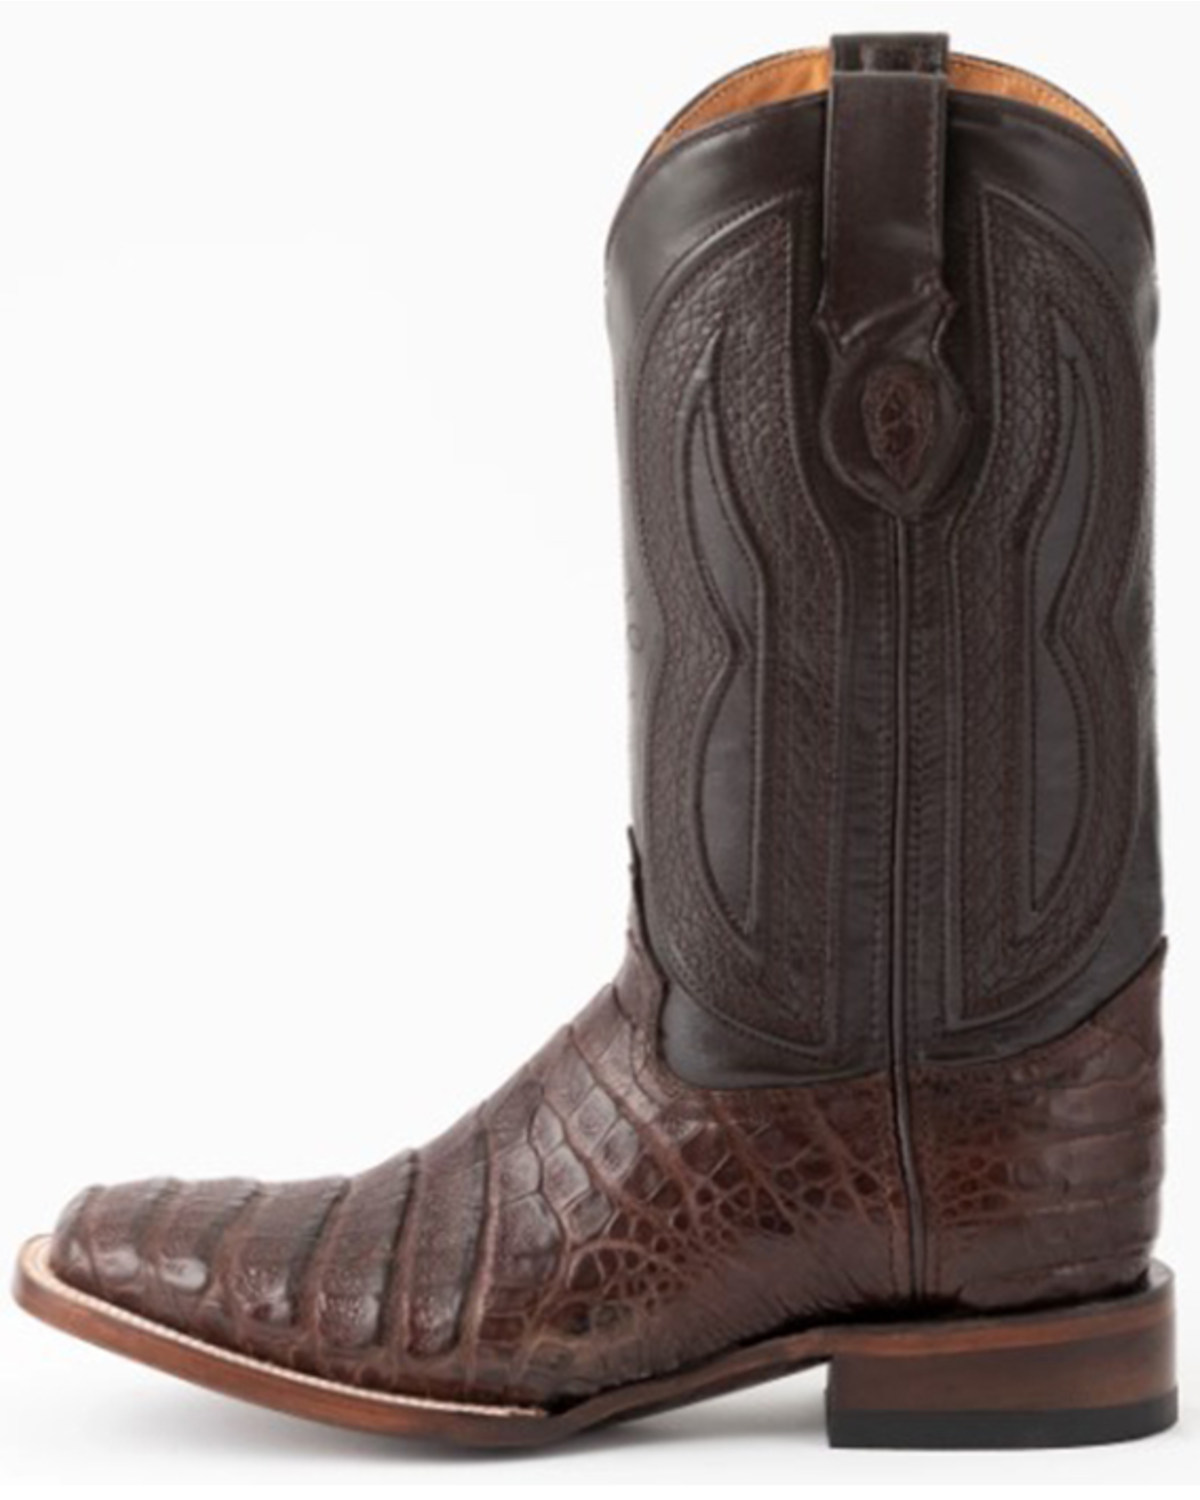 Ferrini  Mens Belly Caiman Chocolate Square Toe   Western Cowboy Boots   Mid Calf - image 3 of 7